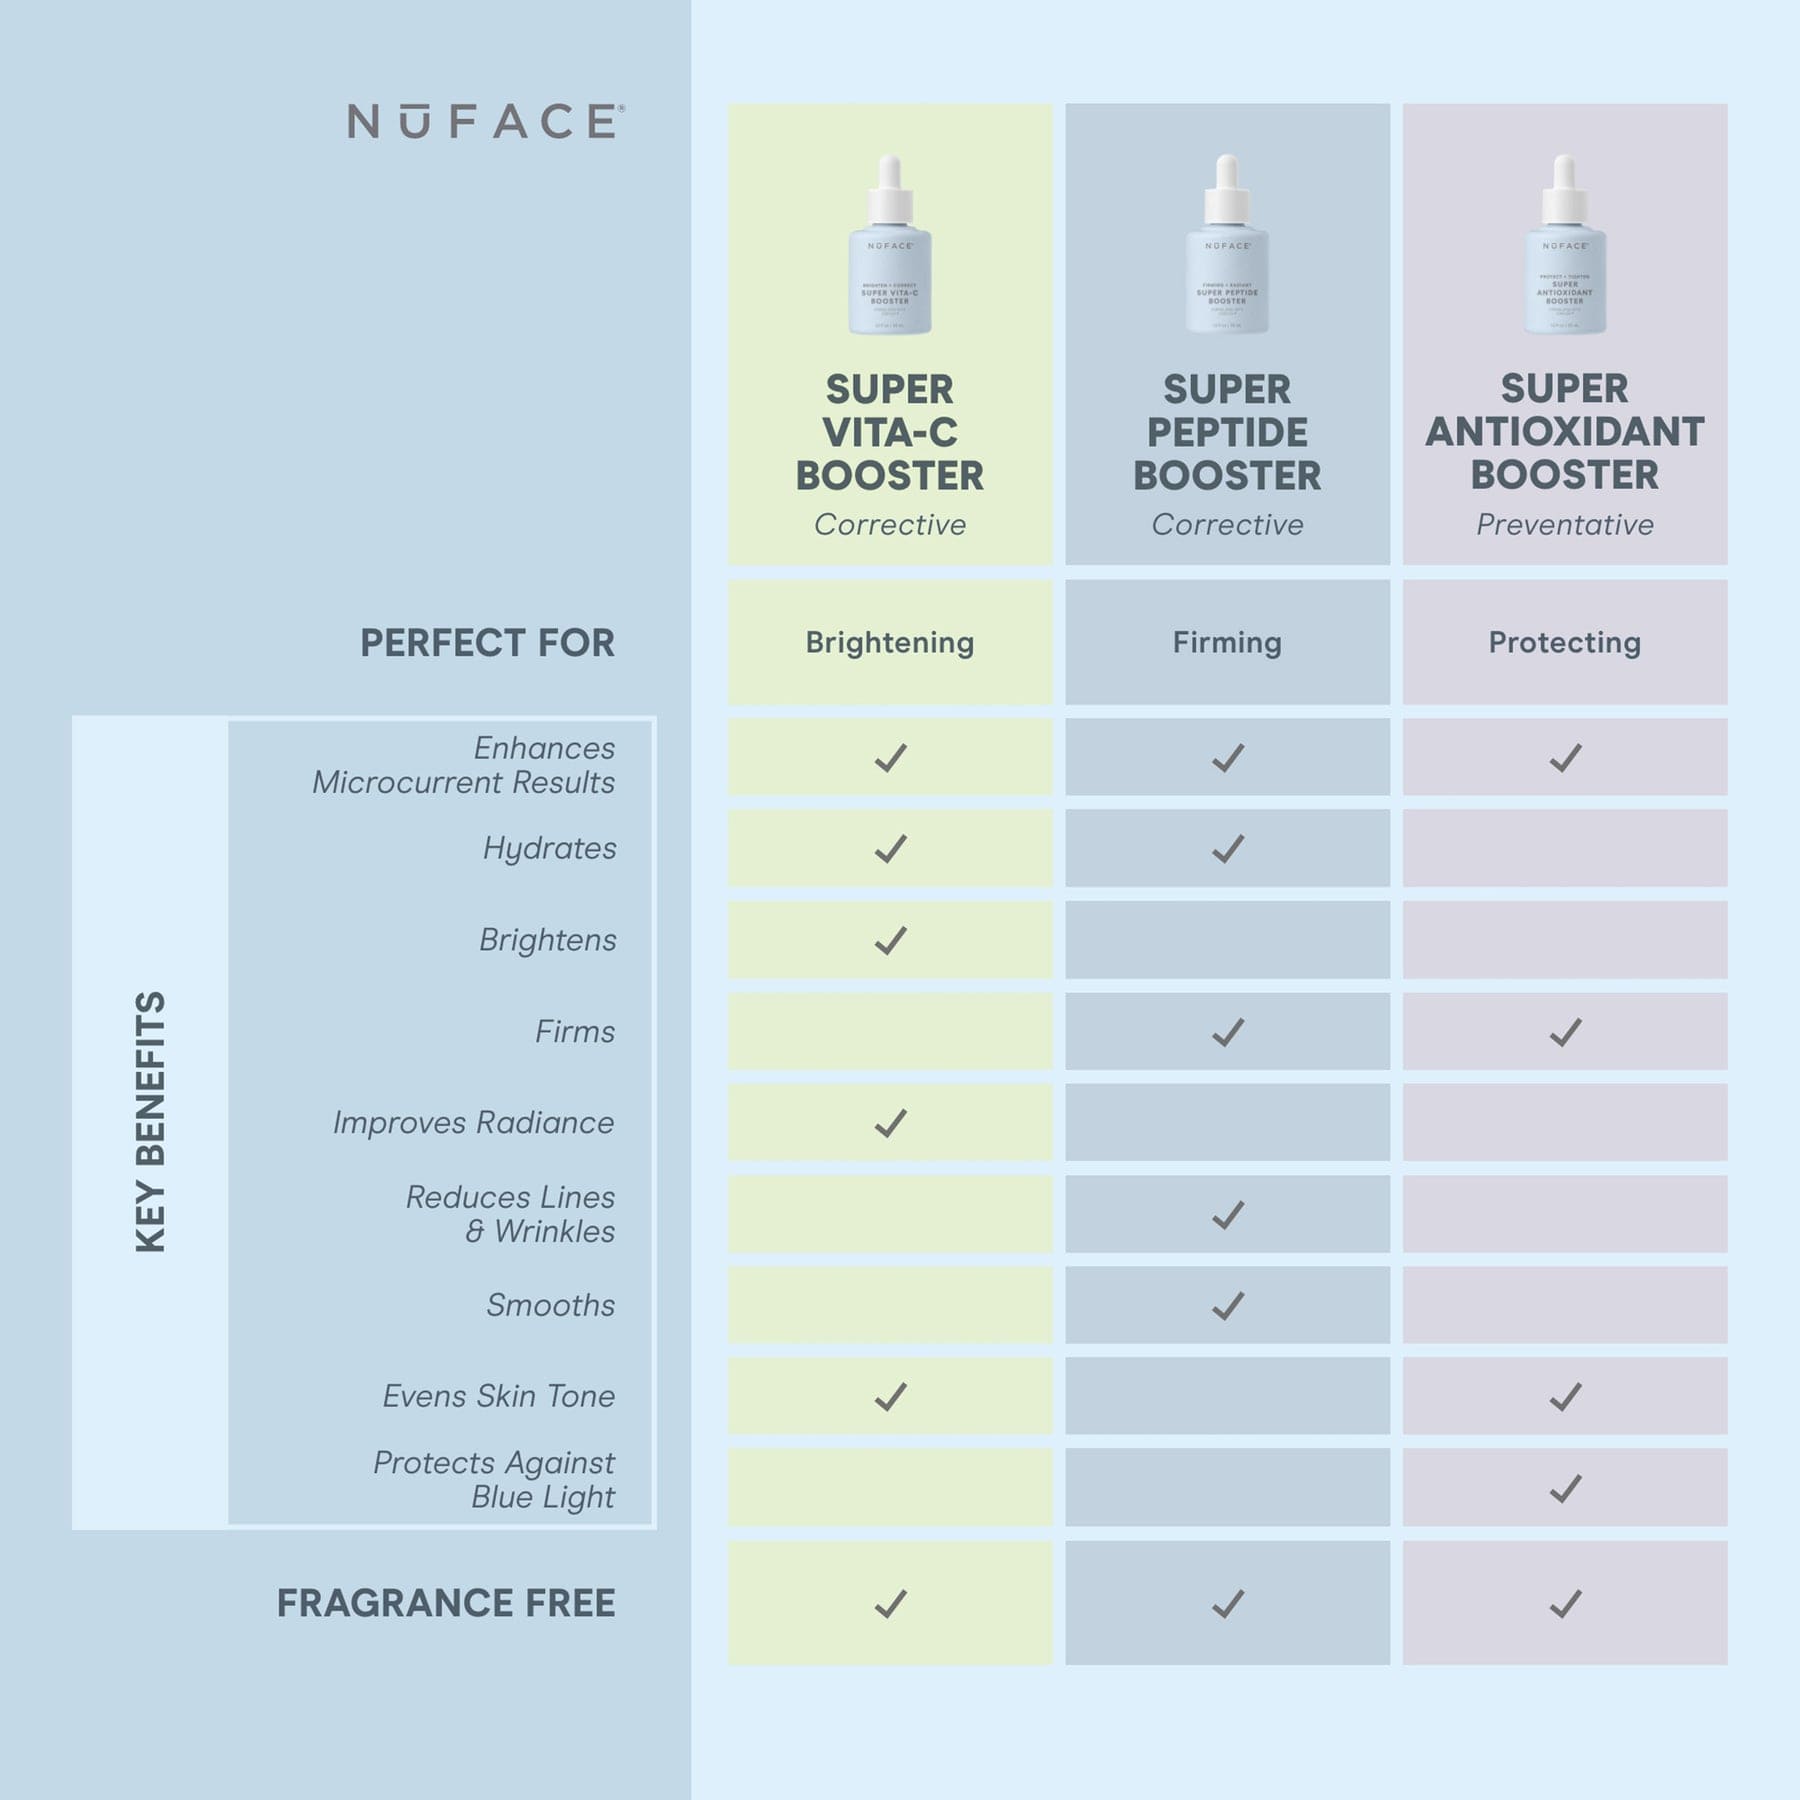 Booster serums by NuFACE.